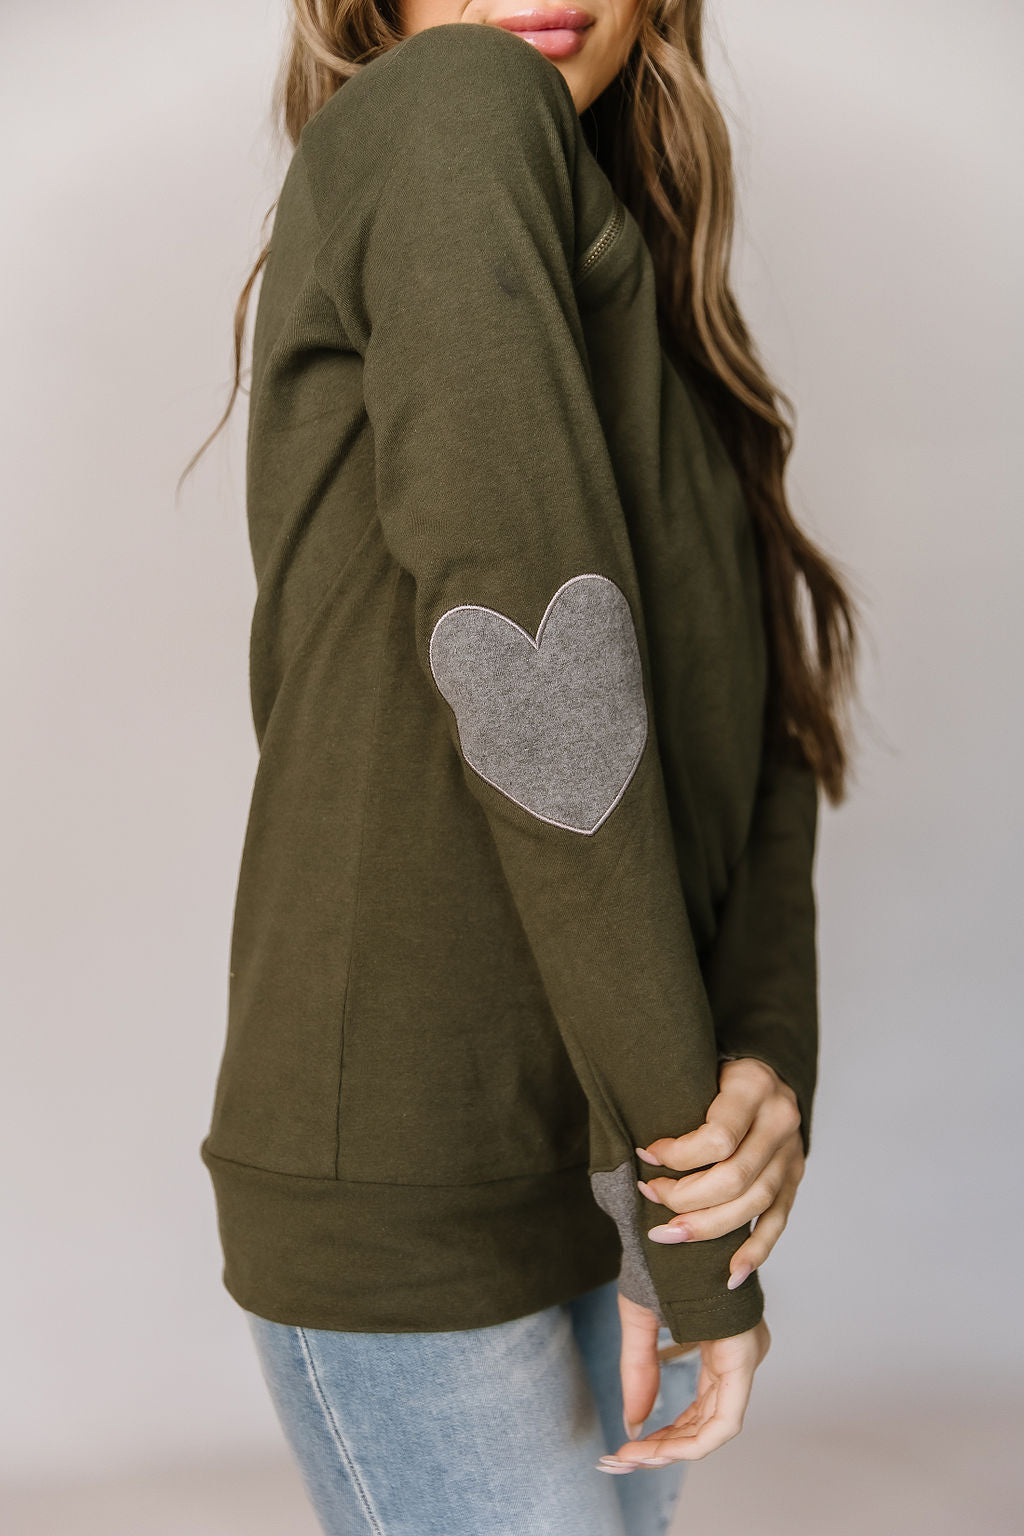 Follow Your Heart Ampersand Ave Elbow Patch Sweatshirt